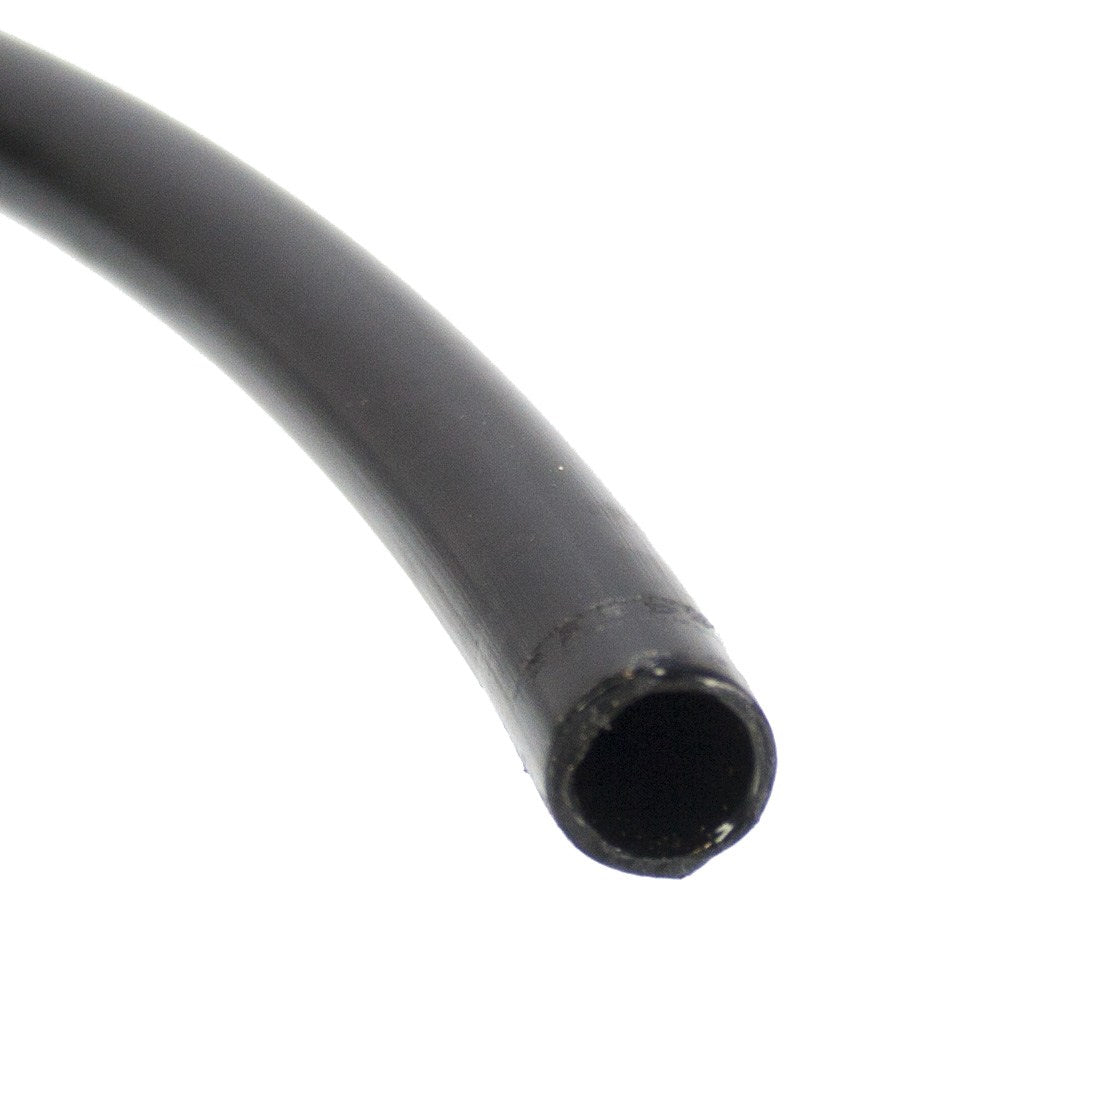 XERO Pure Hose from Carbon Housing to RO Filter - 4 Foot - Nozzle Close-Up View